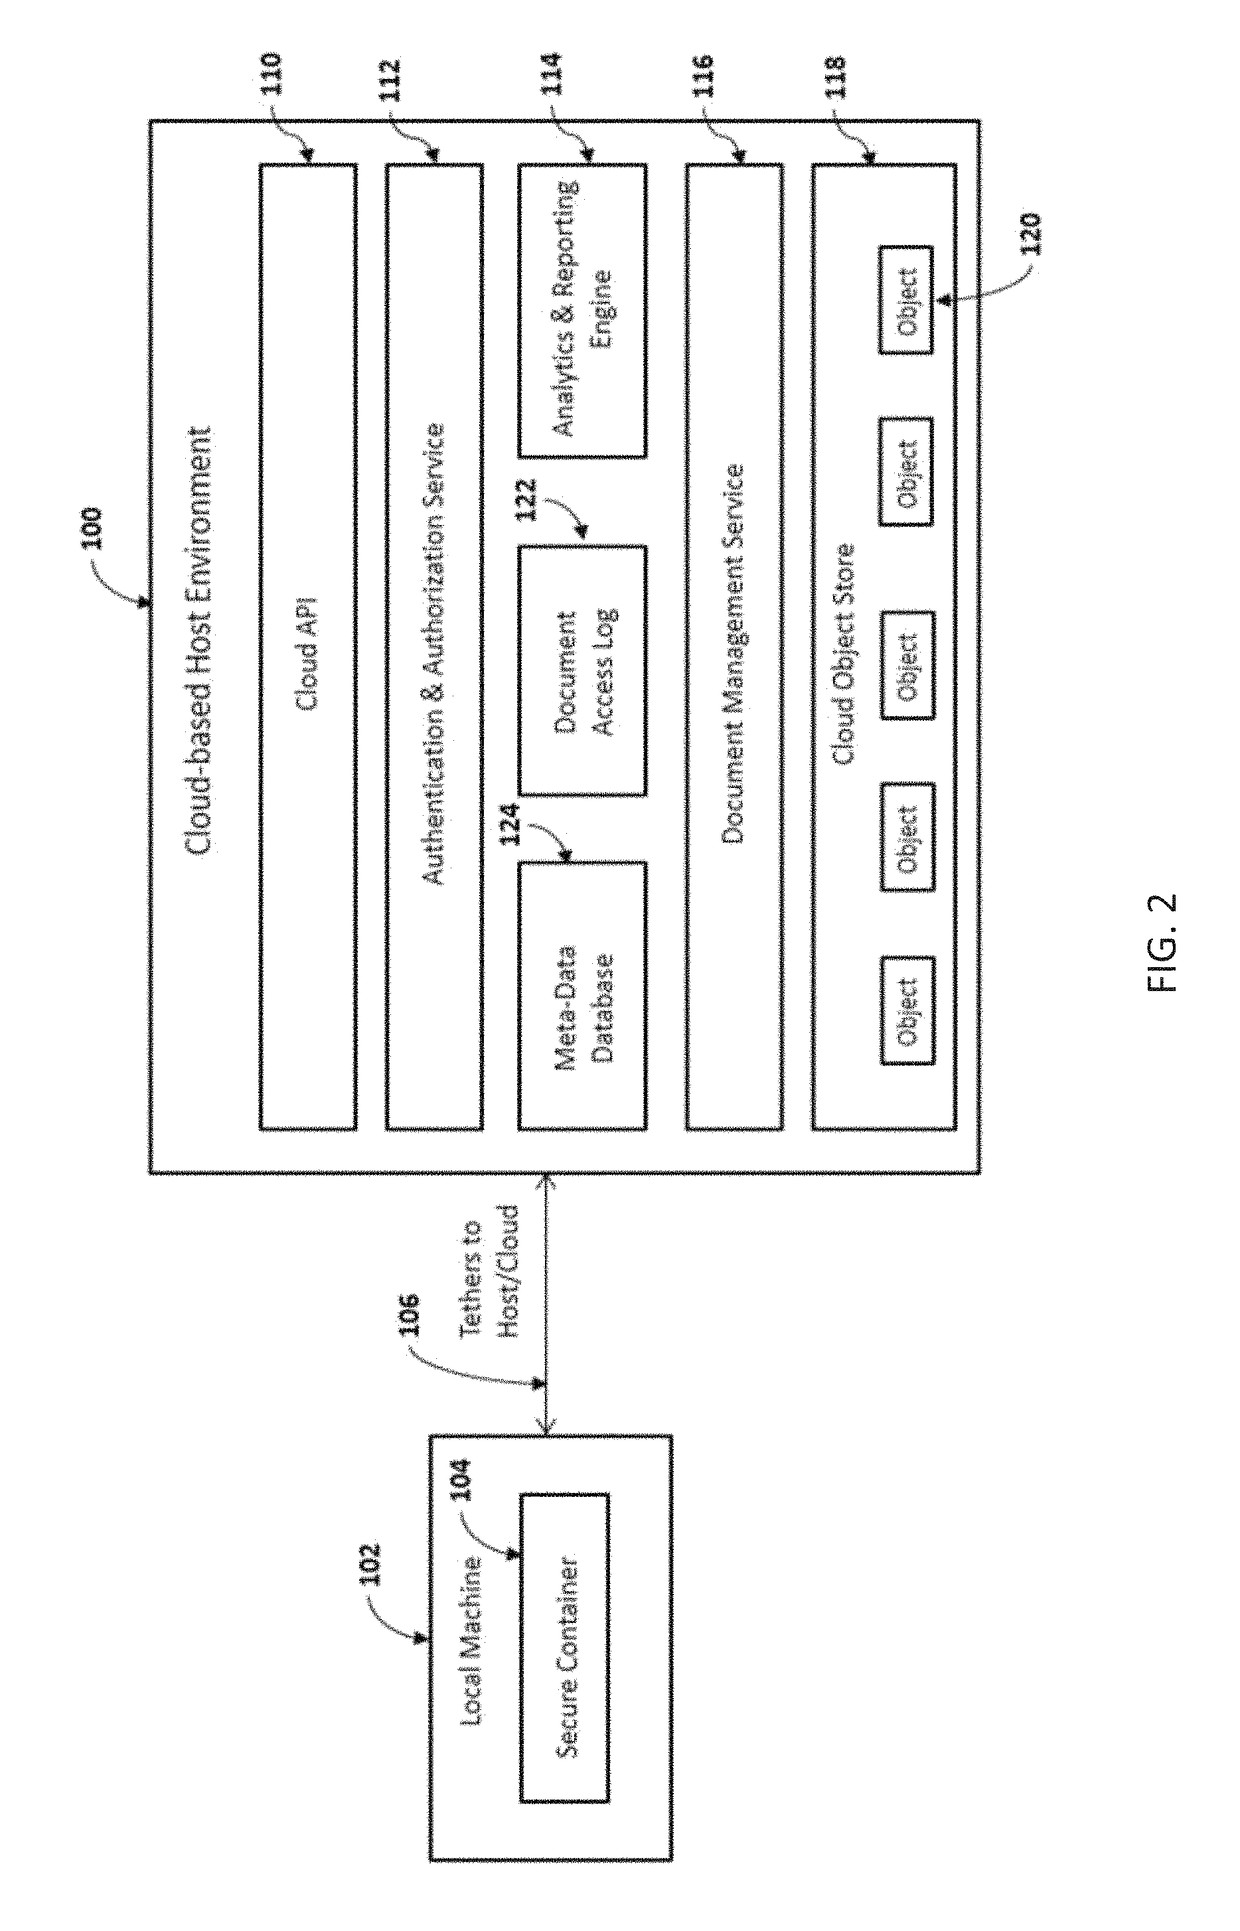 Methods and systems for operating secure digital management aware applications